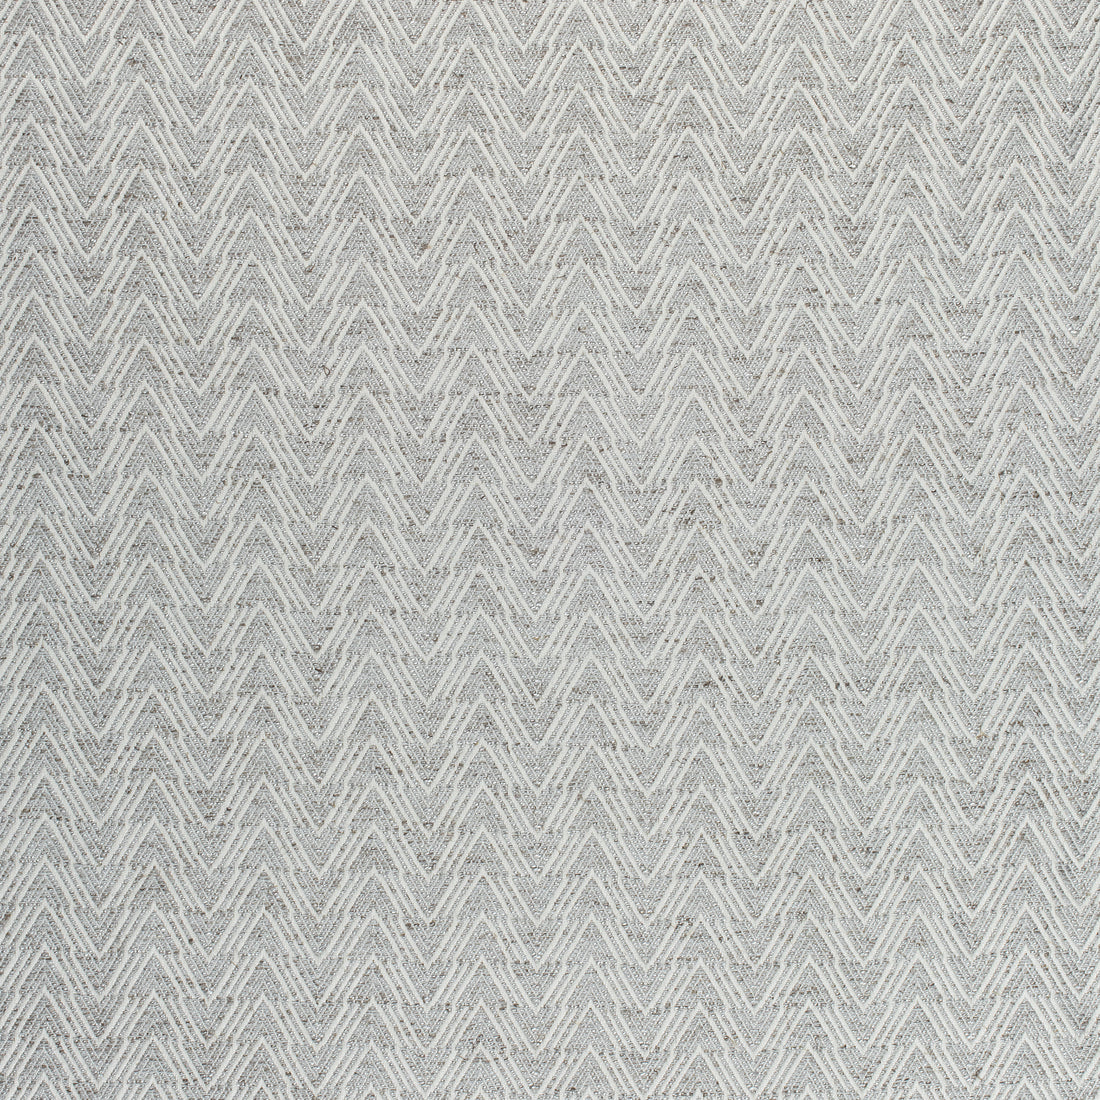 Gatsby fabric in sterling grey color - pattern number W80649 - by Thibaut in the Pinnacle collection